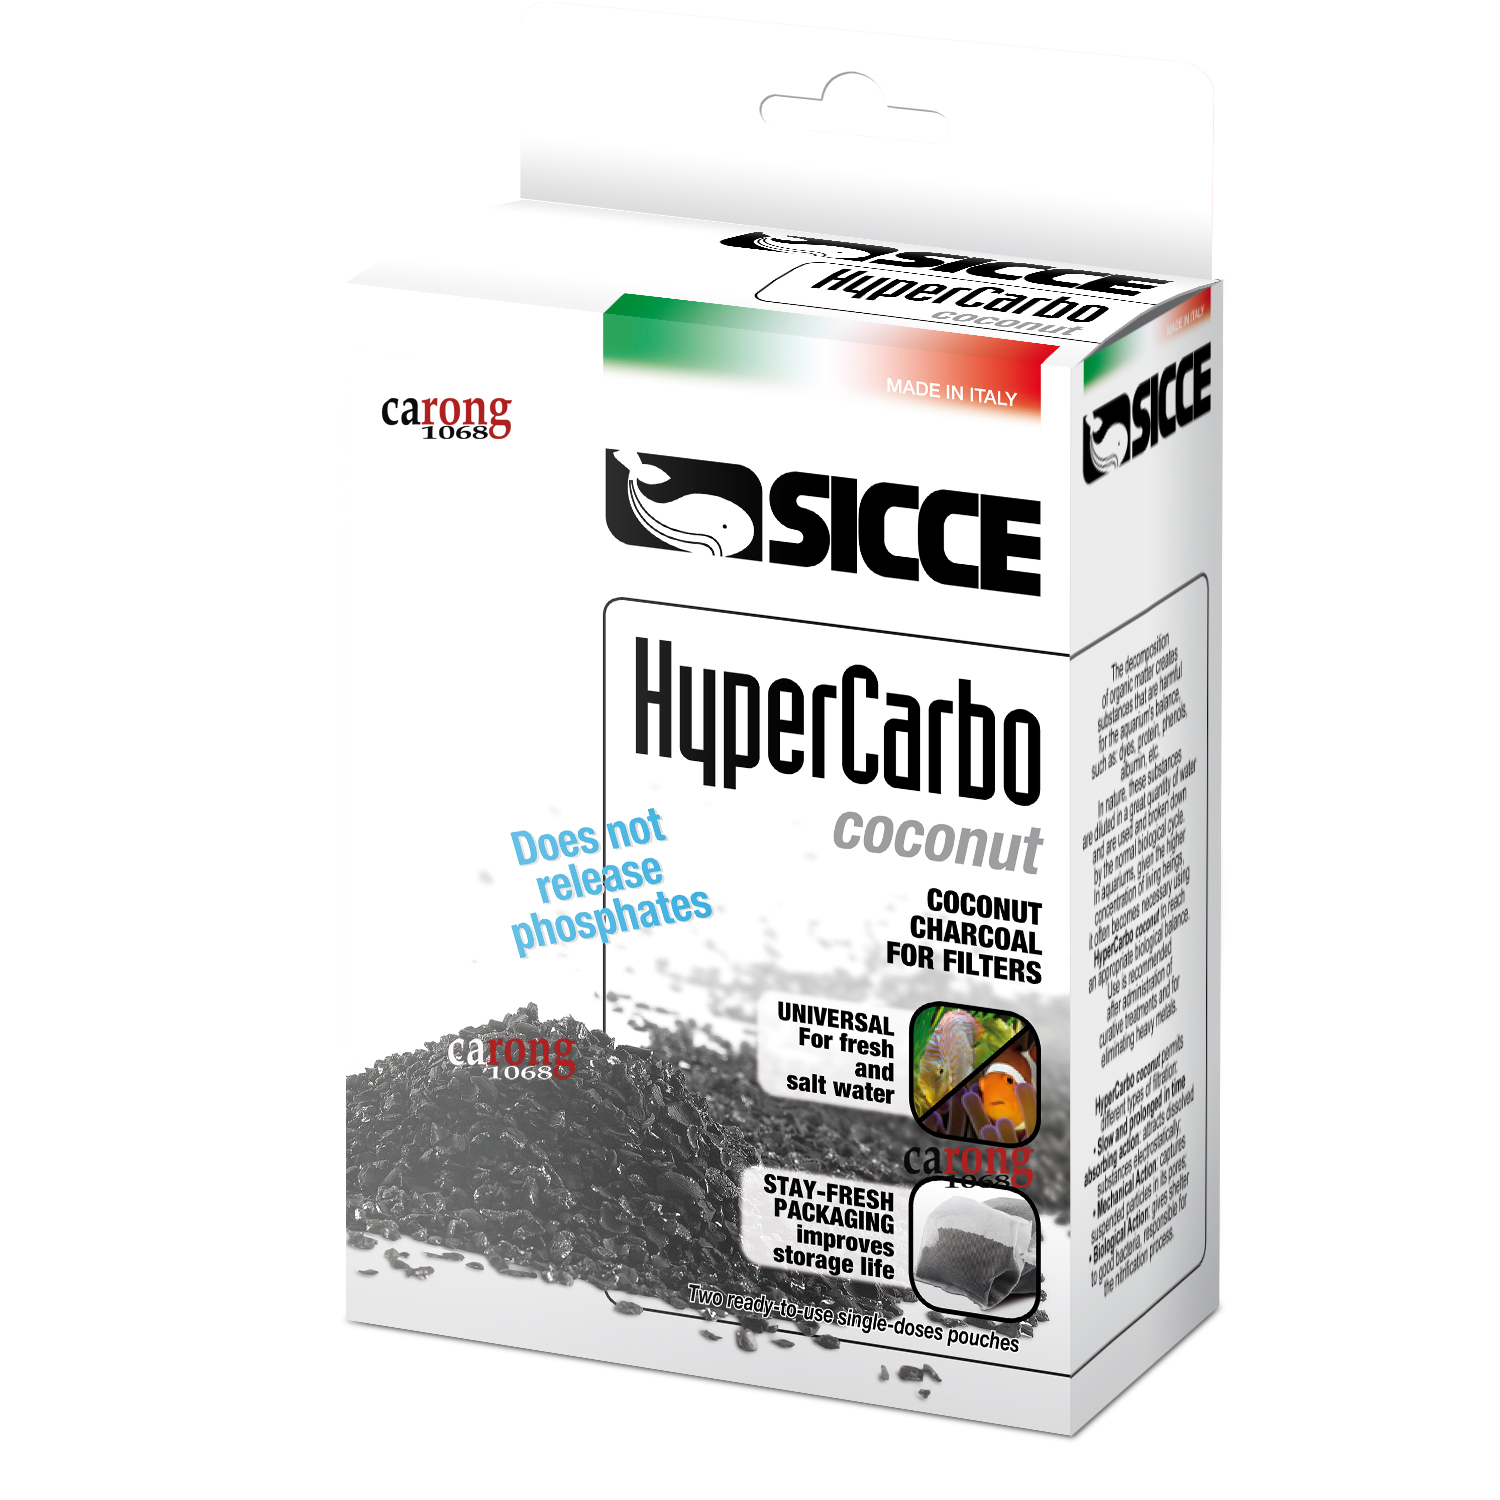 Sicce Hypercarbo Cocco